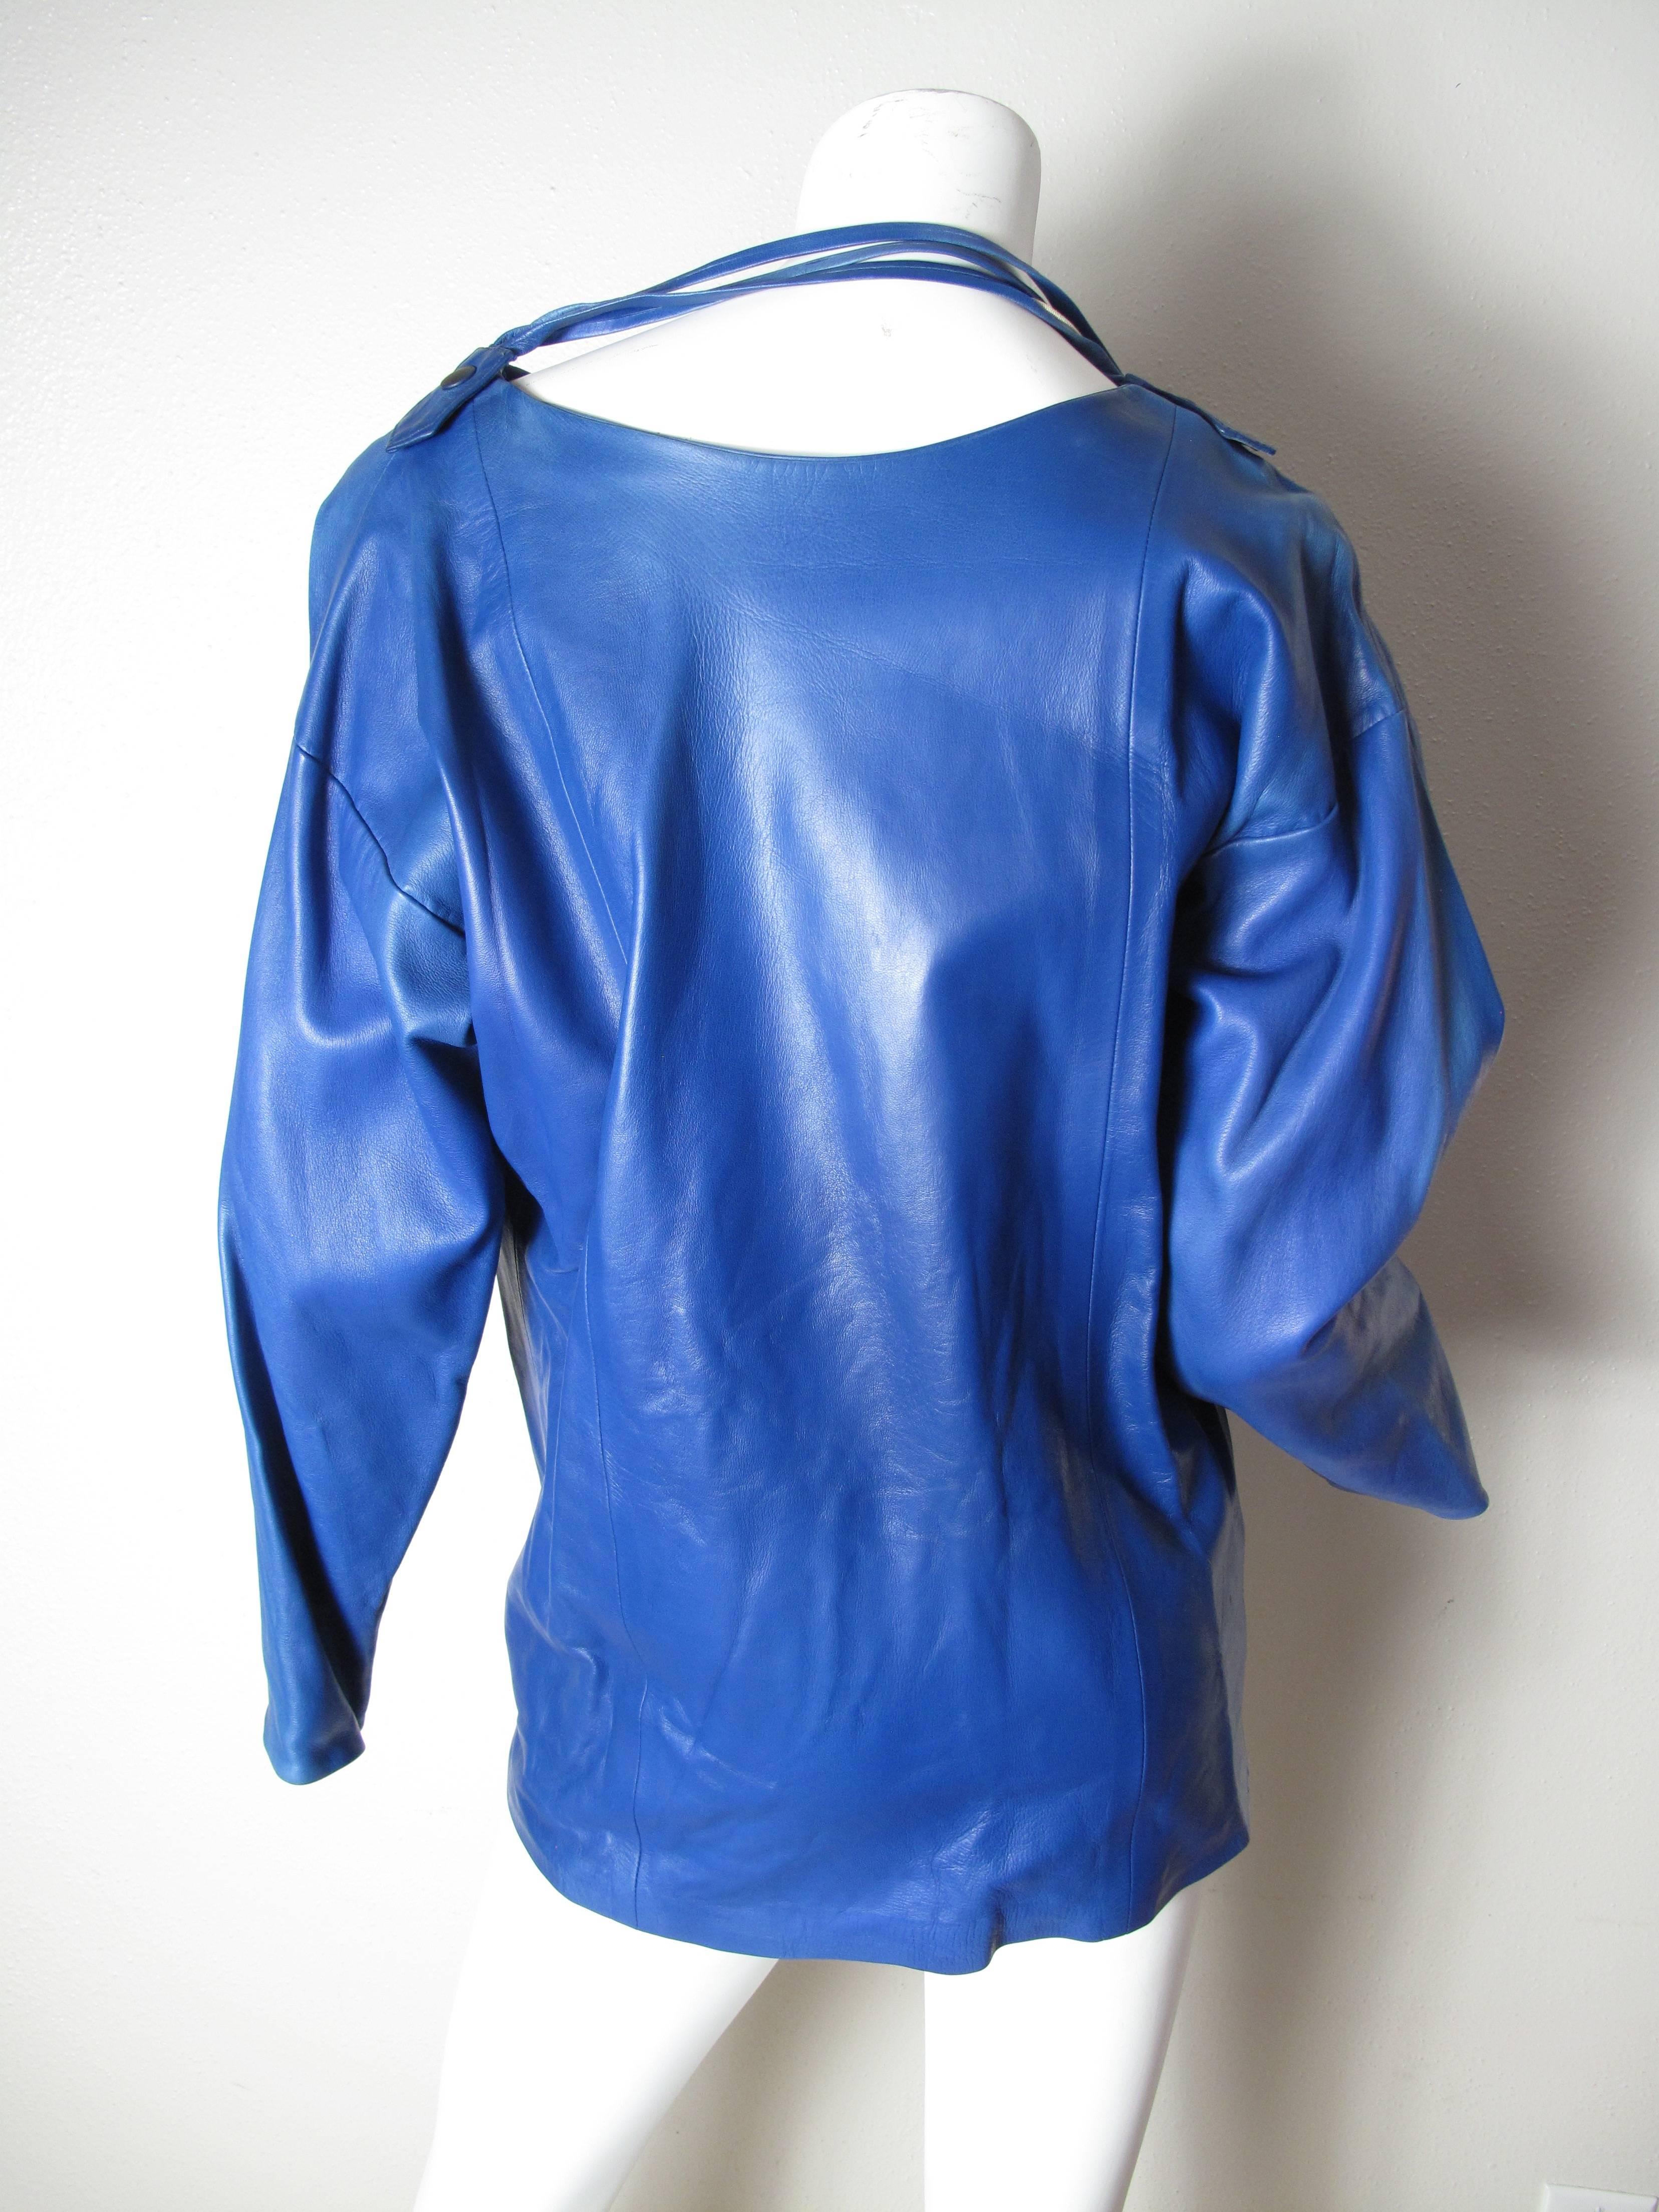 1980s Guy Laroche blue leather top. Condition: Good, some spots.  Size Large

We offer free ground shipping within the US.  We accept returns for refund, please see our terms.  Please let us know if you have any questions. 